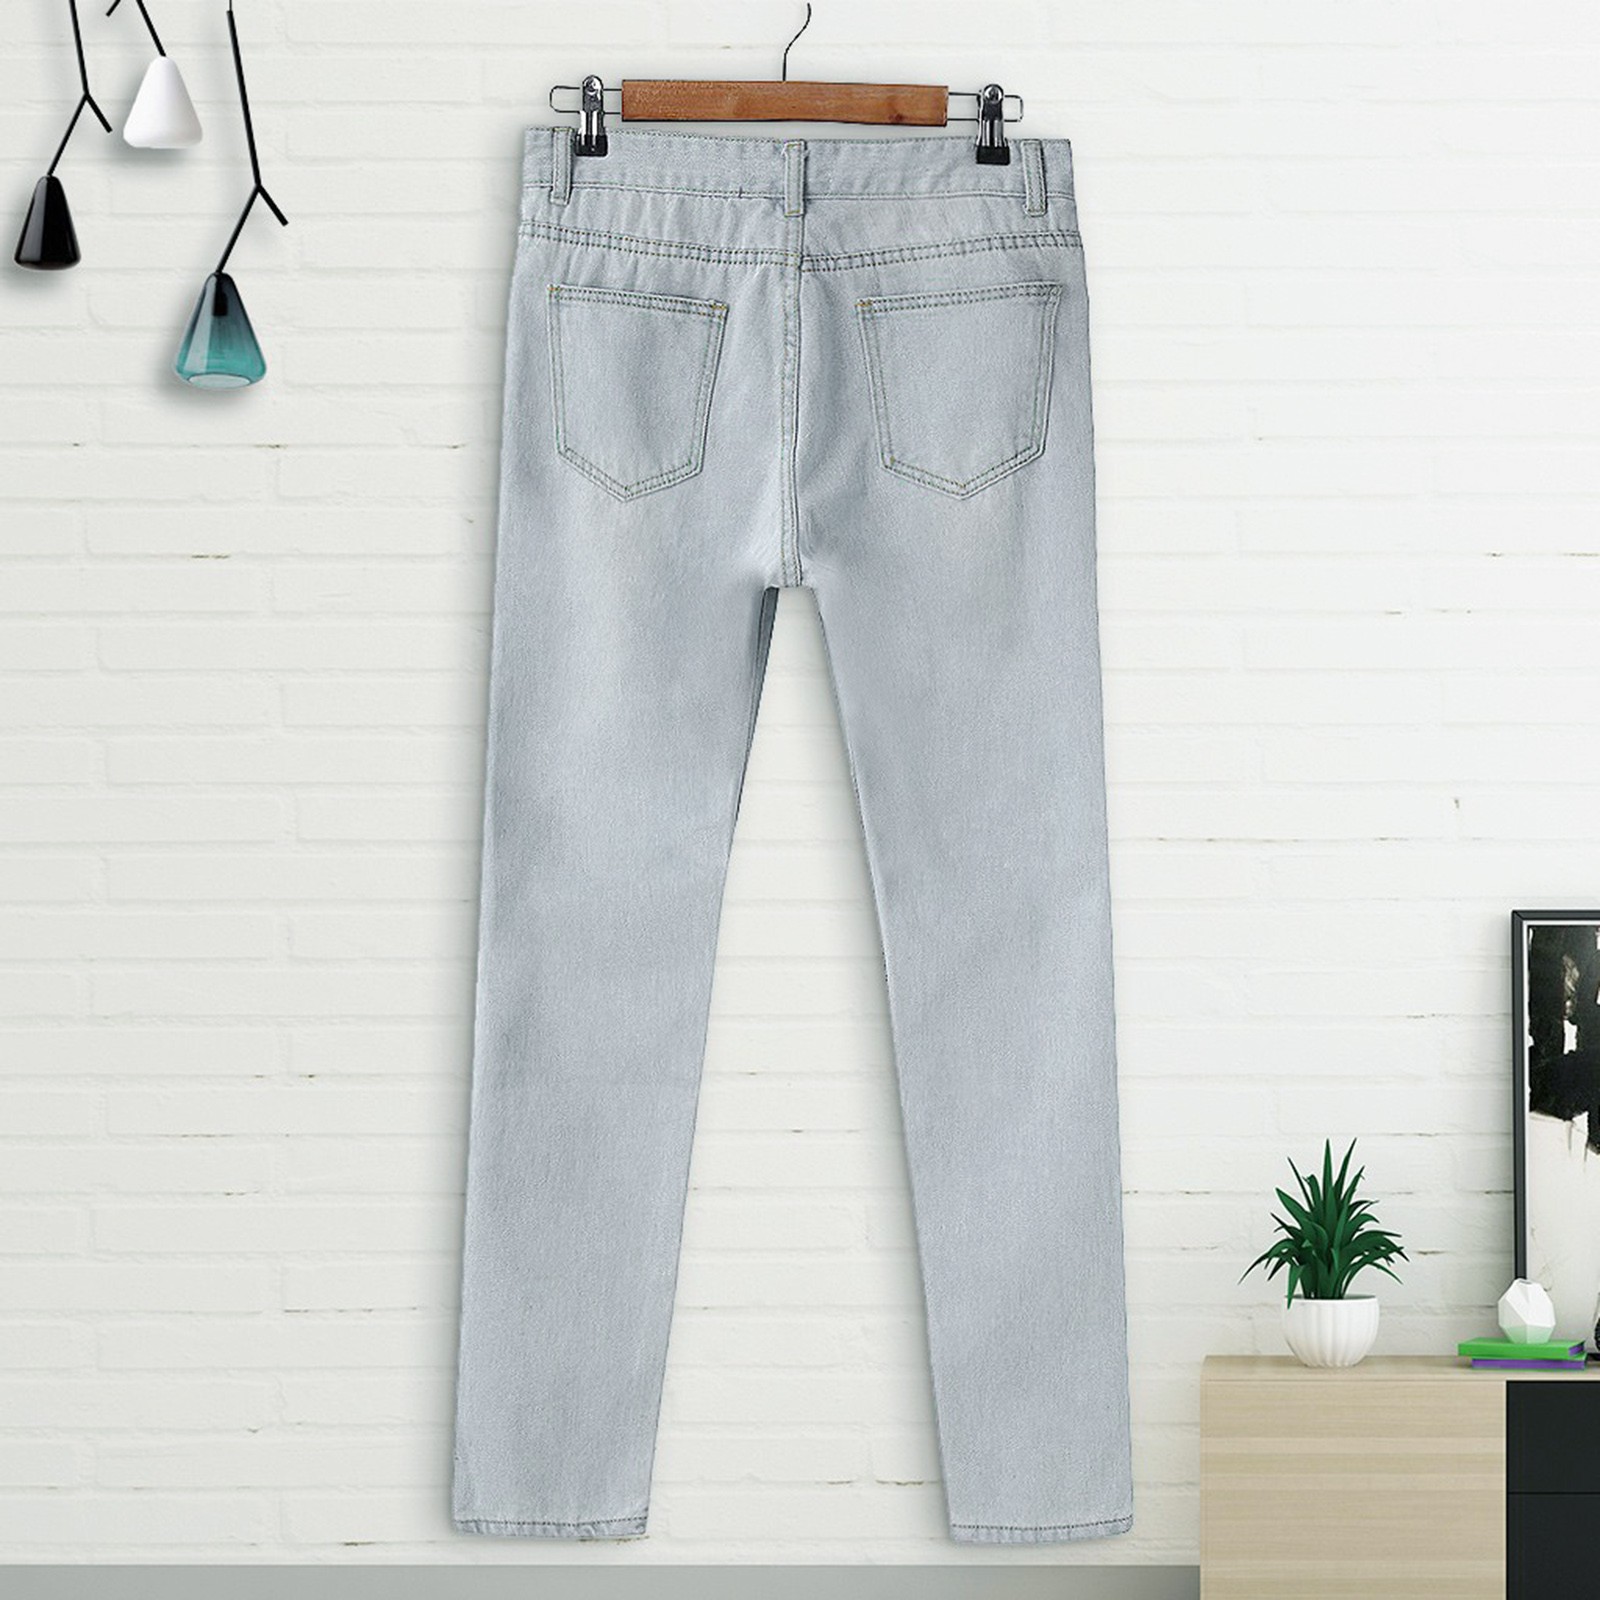 Spftem Women High Waist Straight Jeans Pant Holes Denim Jeans Ripped Casual Jeans - image 4 of 7